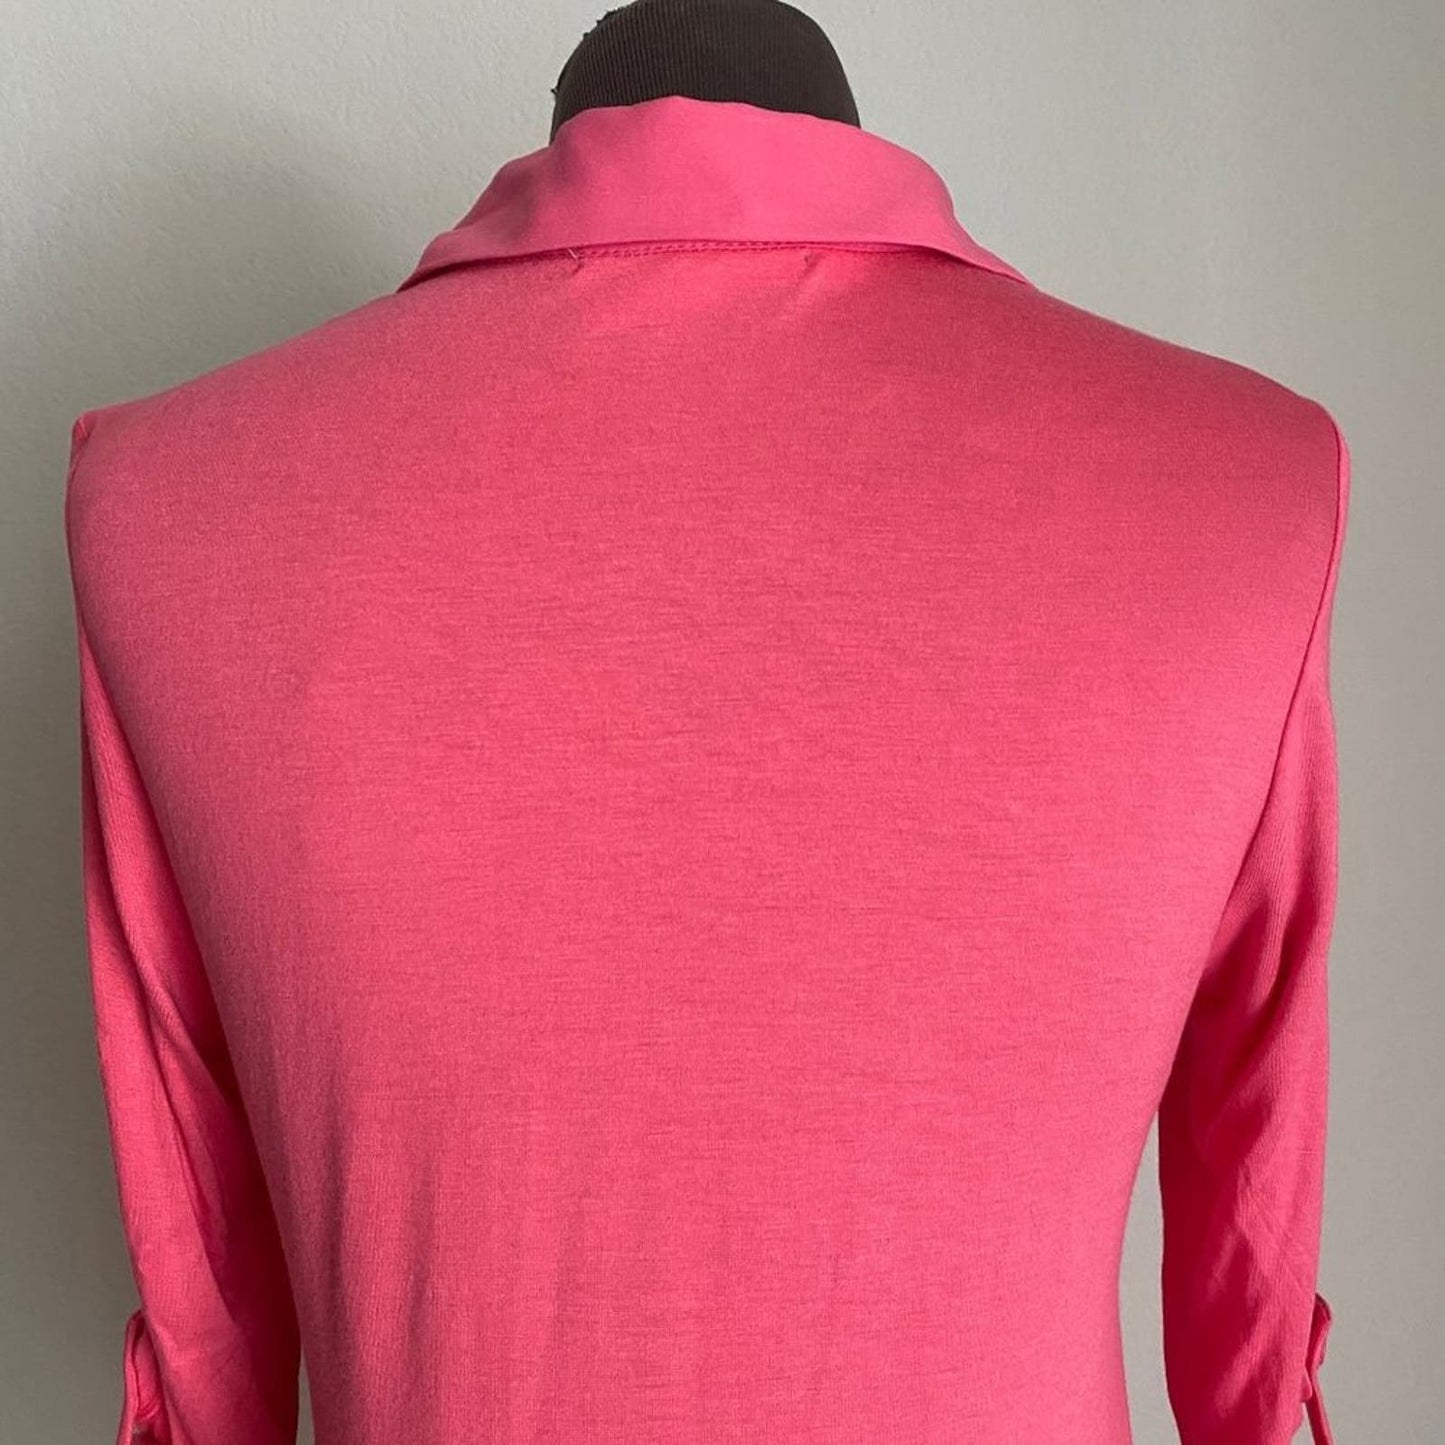 Pleione sz S hot pink collared v-neck work career blouse NWT